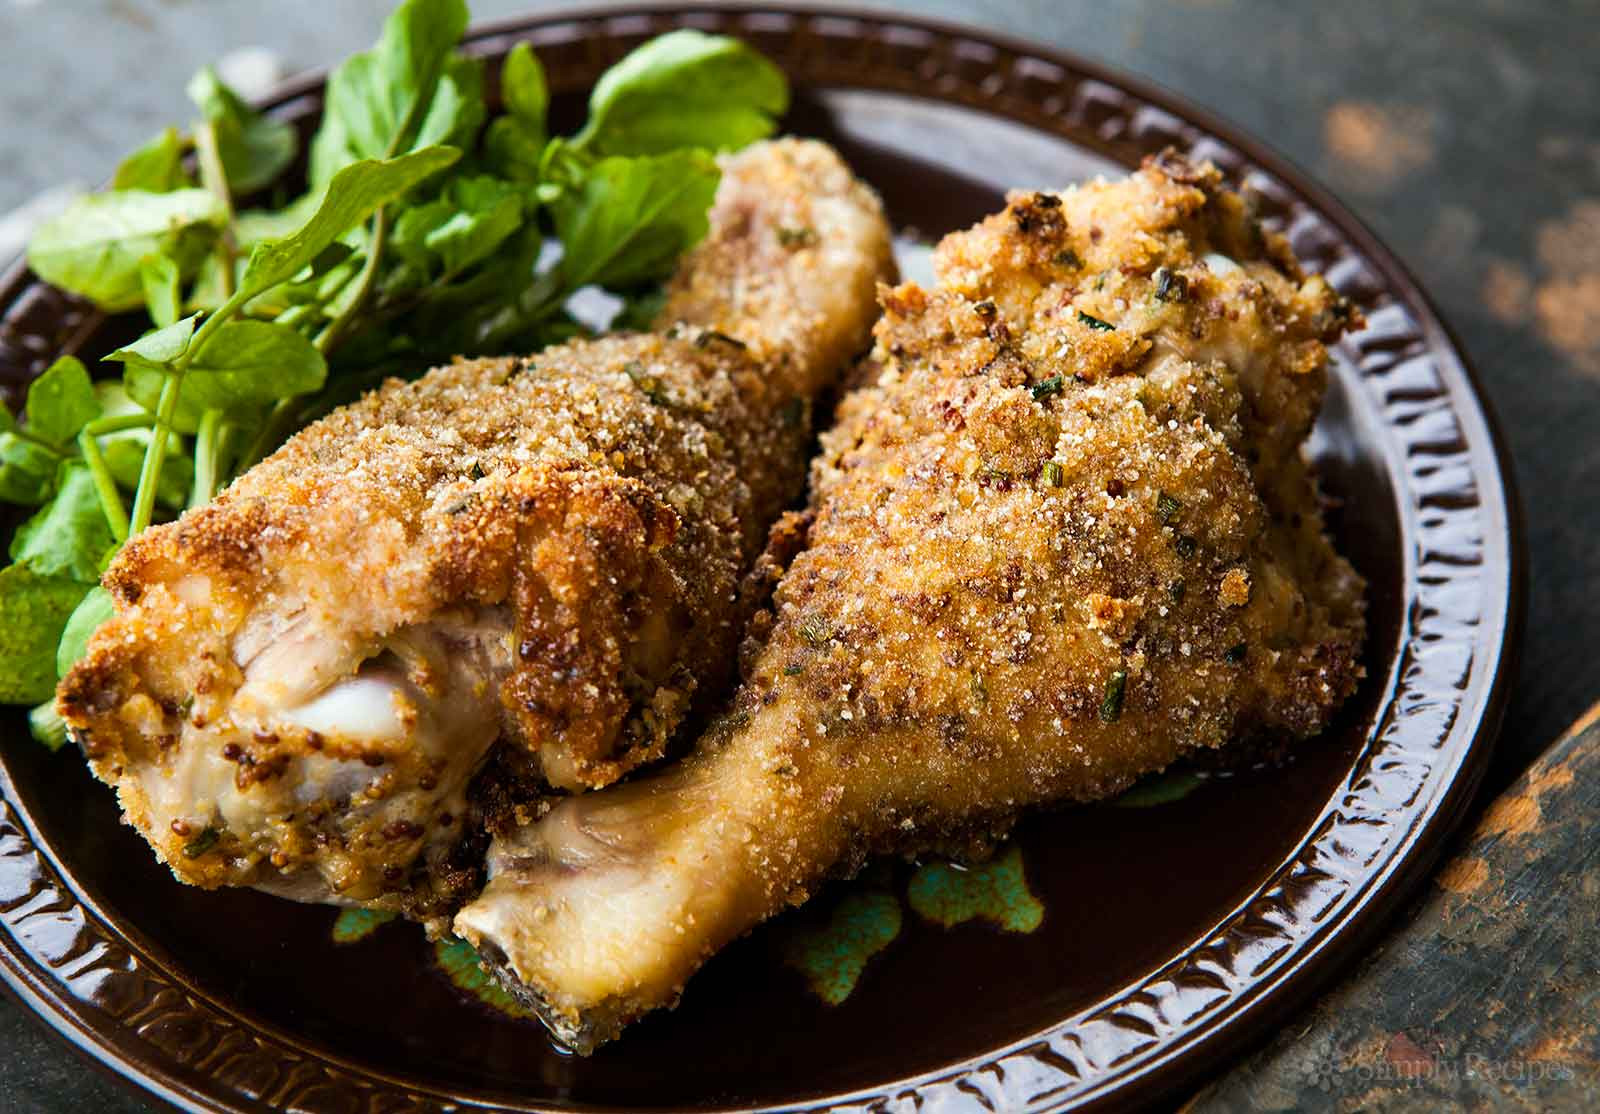 Recipes For Baked Chicken
 Breaded and Baked Chicken Drumsticks Recipe